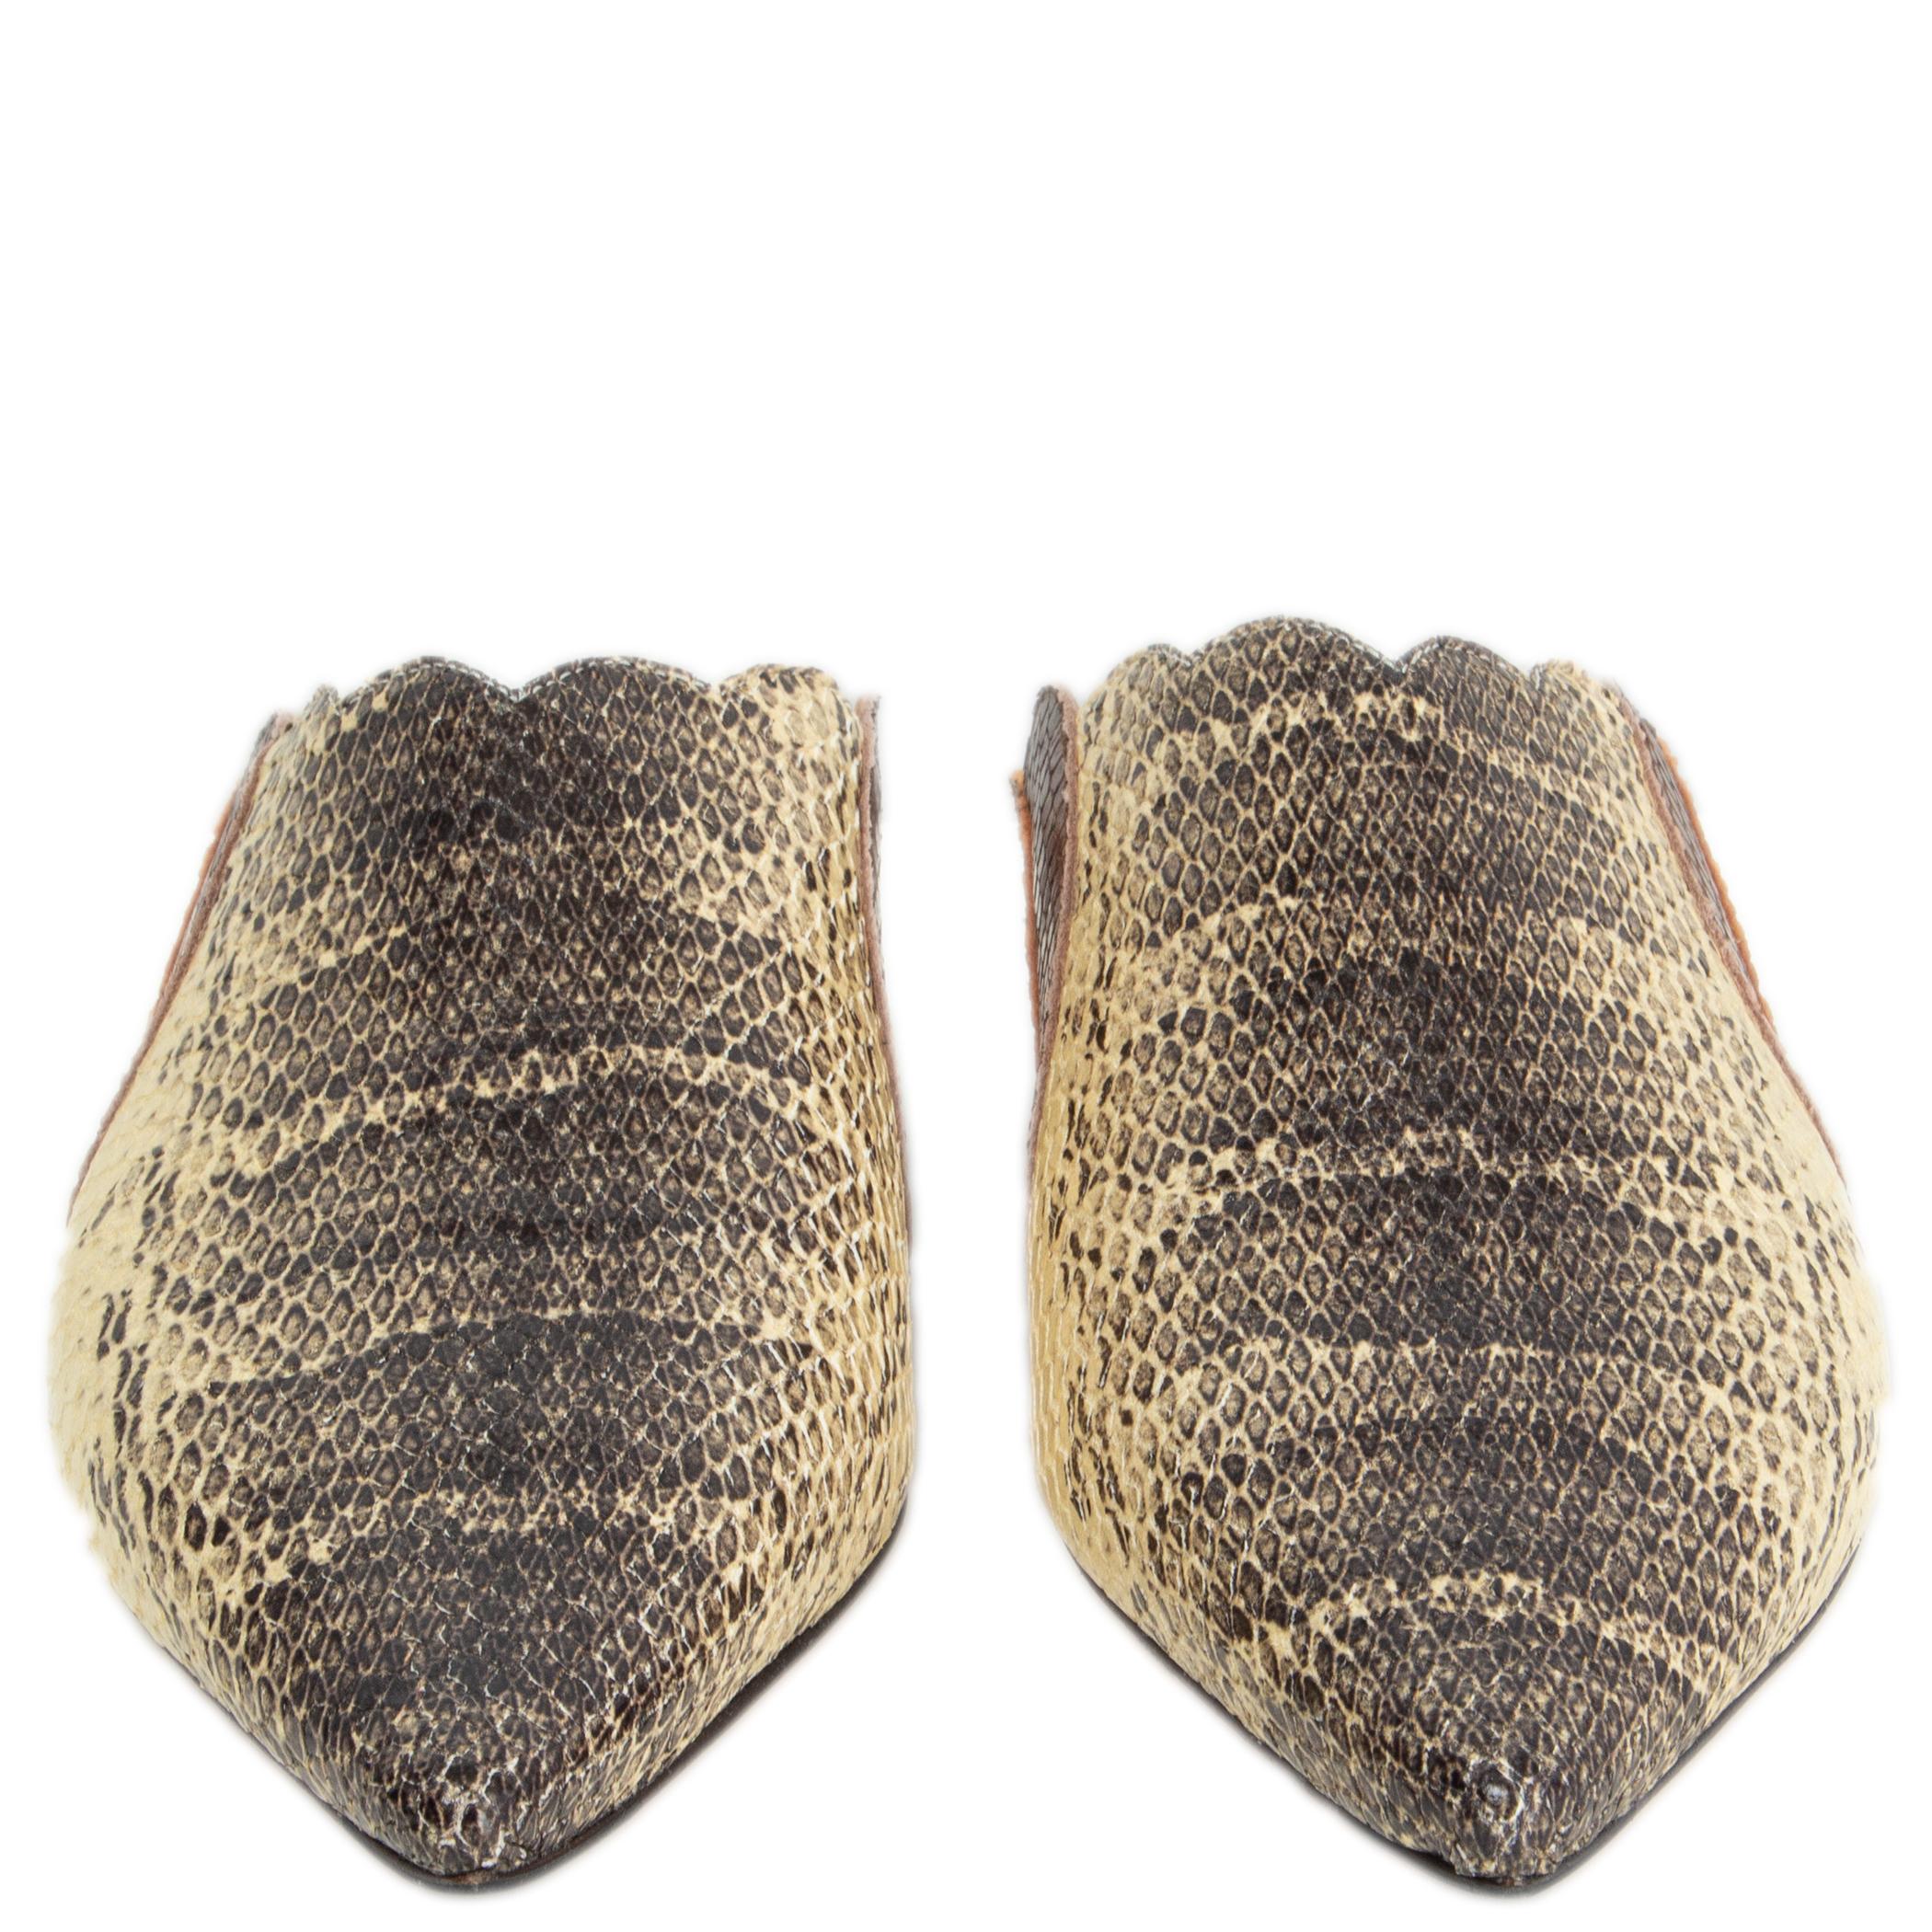 100% authentic Chloé Lauren mules with oversized scallops in vanilla, black, brown and cognac snake printed calfskin. Brand new. Come with dust bag. 

Measurements
Imprinted Size	37
Shoe Size	37
Inside Sole	24cm (9.4in)
Width	7.5cm (2.9in)
Heel	1cm